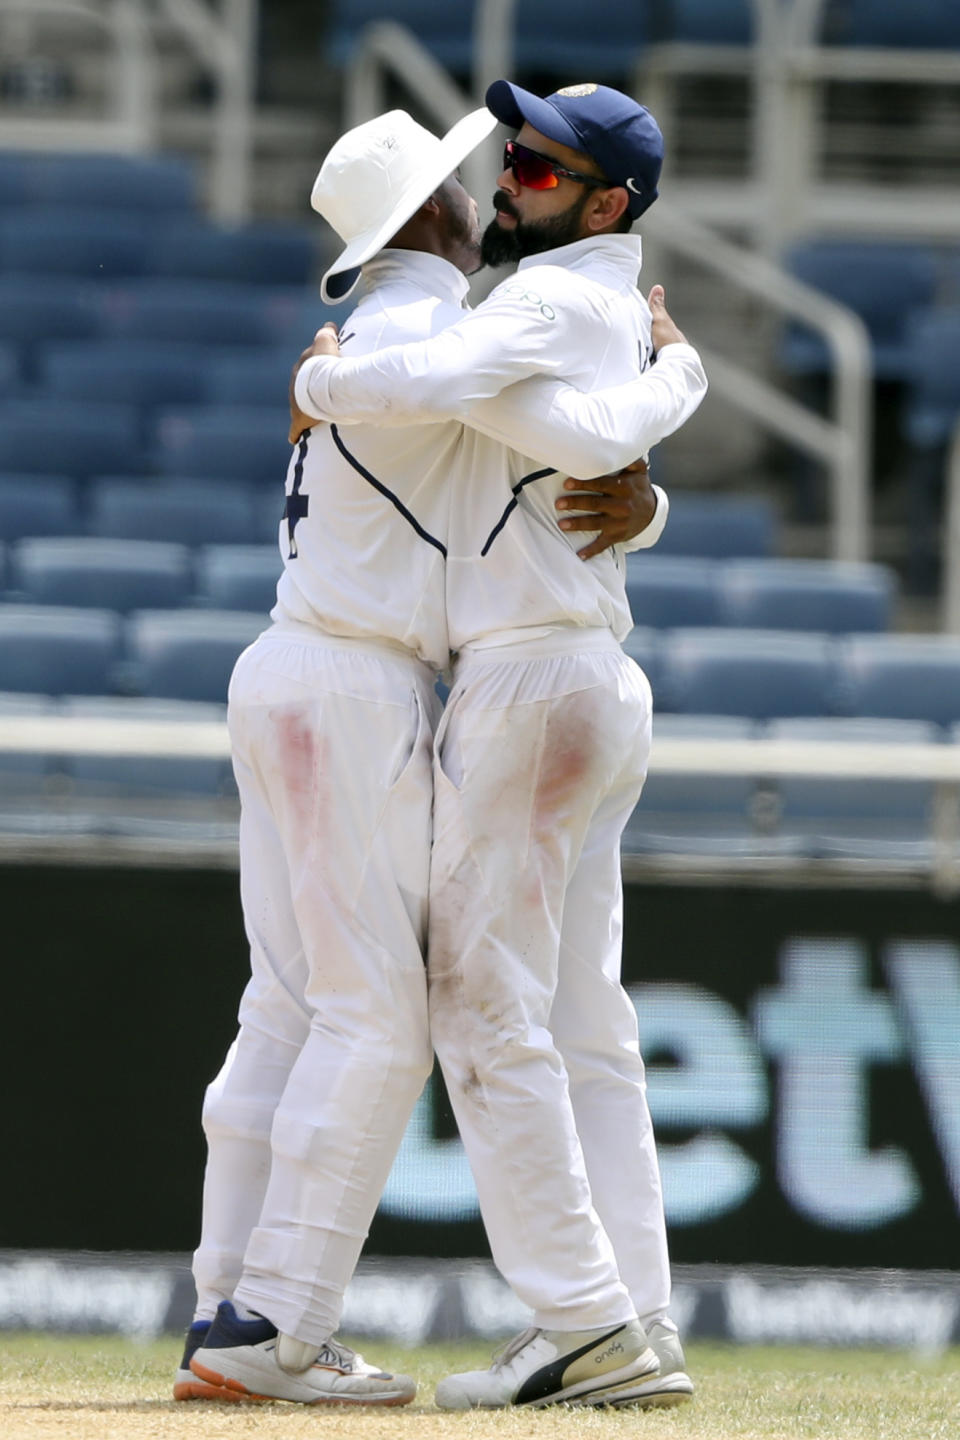 India's captain Virat Kohli and Ravindra Jadeja embrace at the end of day four of the second Test cricket match against West Indies at Sabina Park cricket ground in Kingston, Jamaica Monday, Sept. 2, 2019. India won by 257 runs. (AP Photo/Ricardo Mazalan)